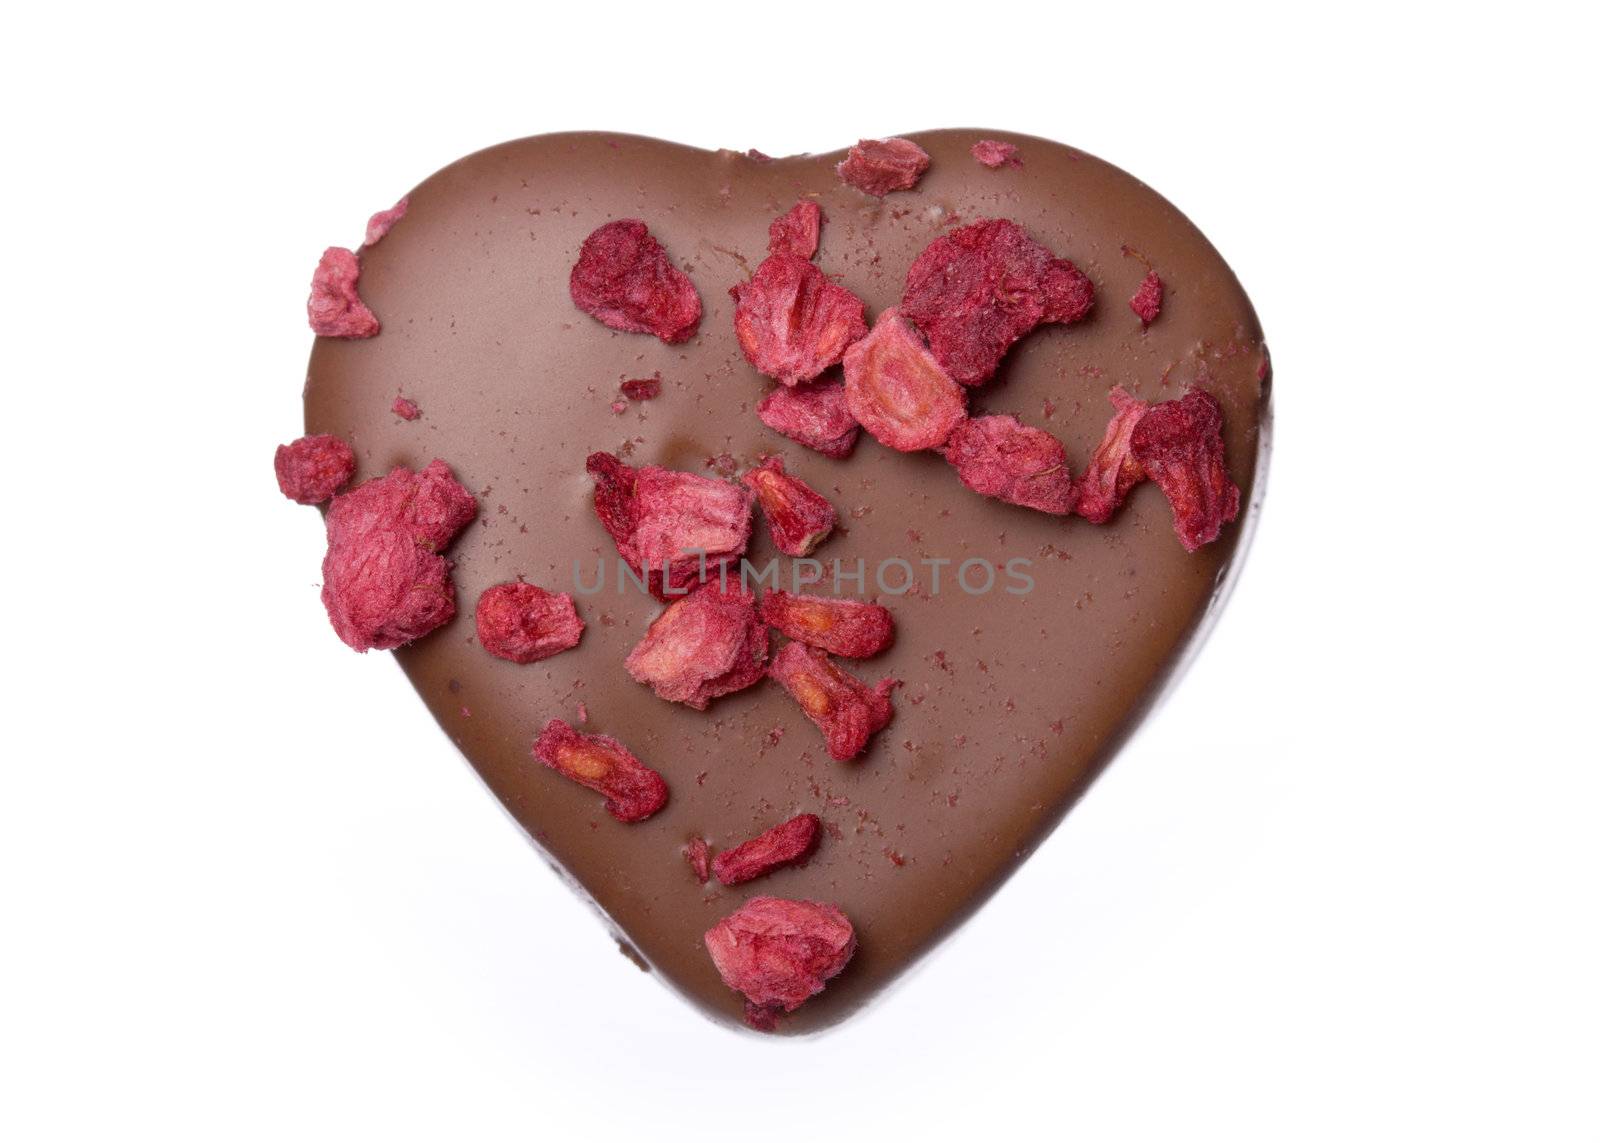 Single chocolate decorated with dried raspberry pieces